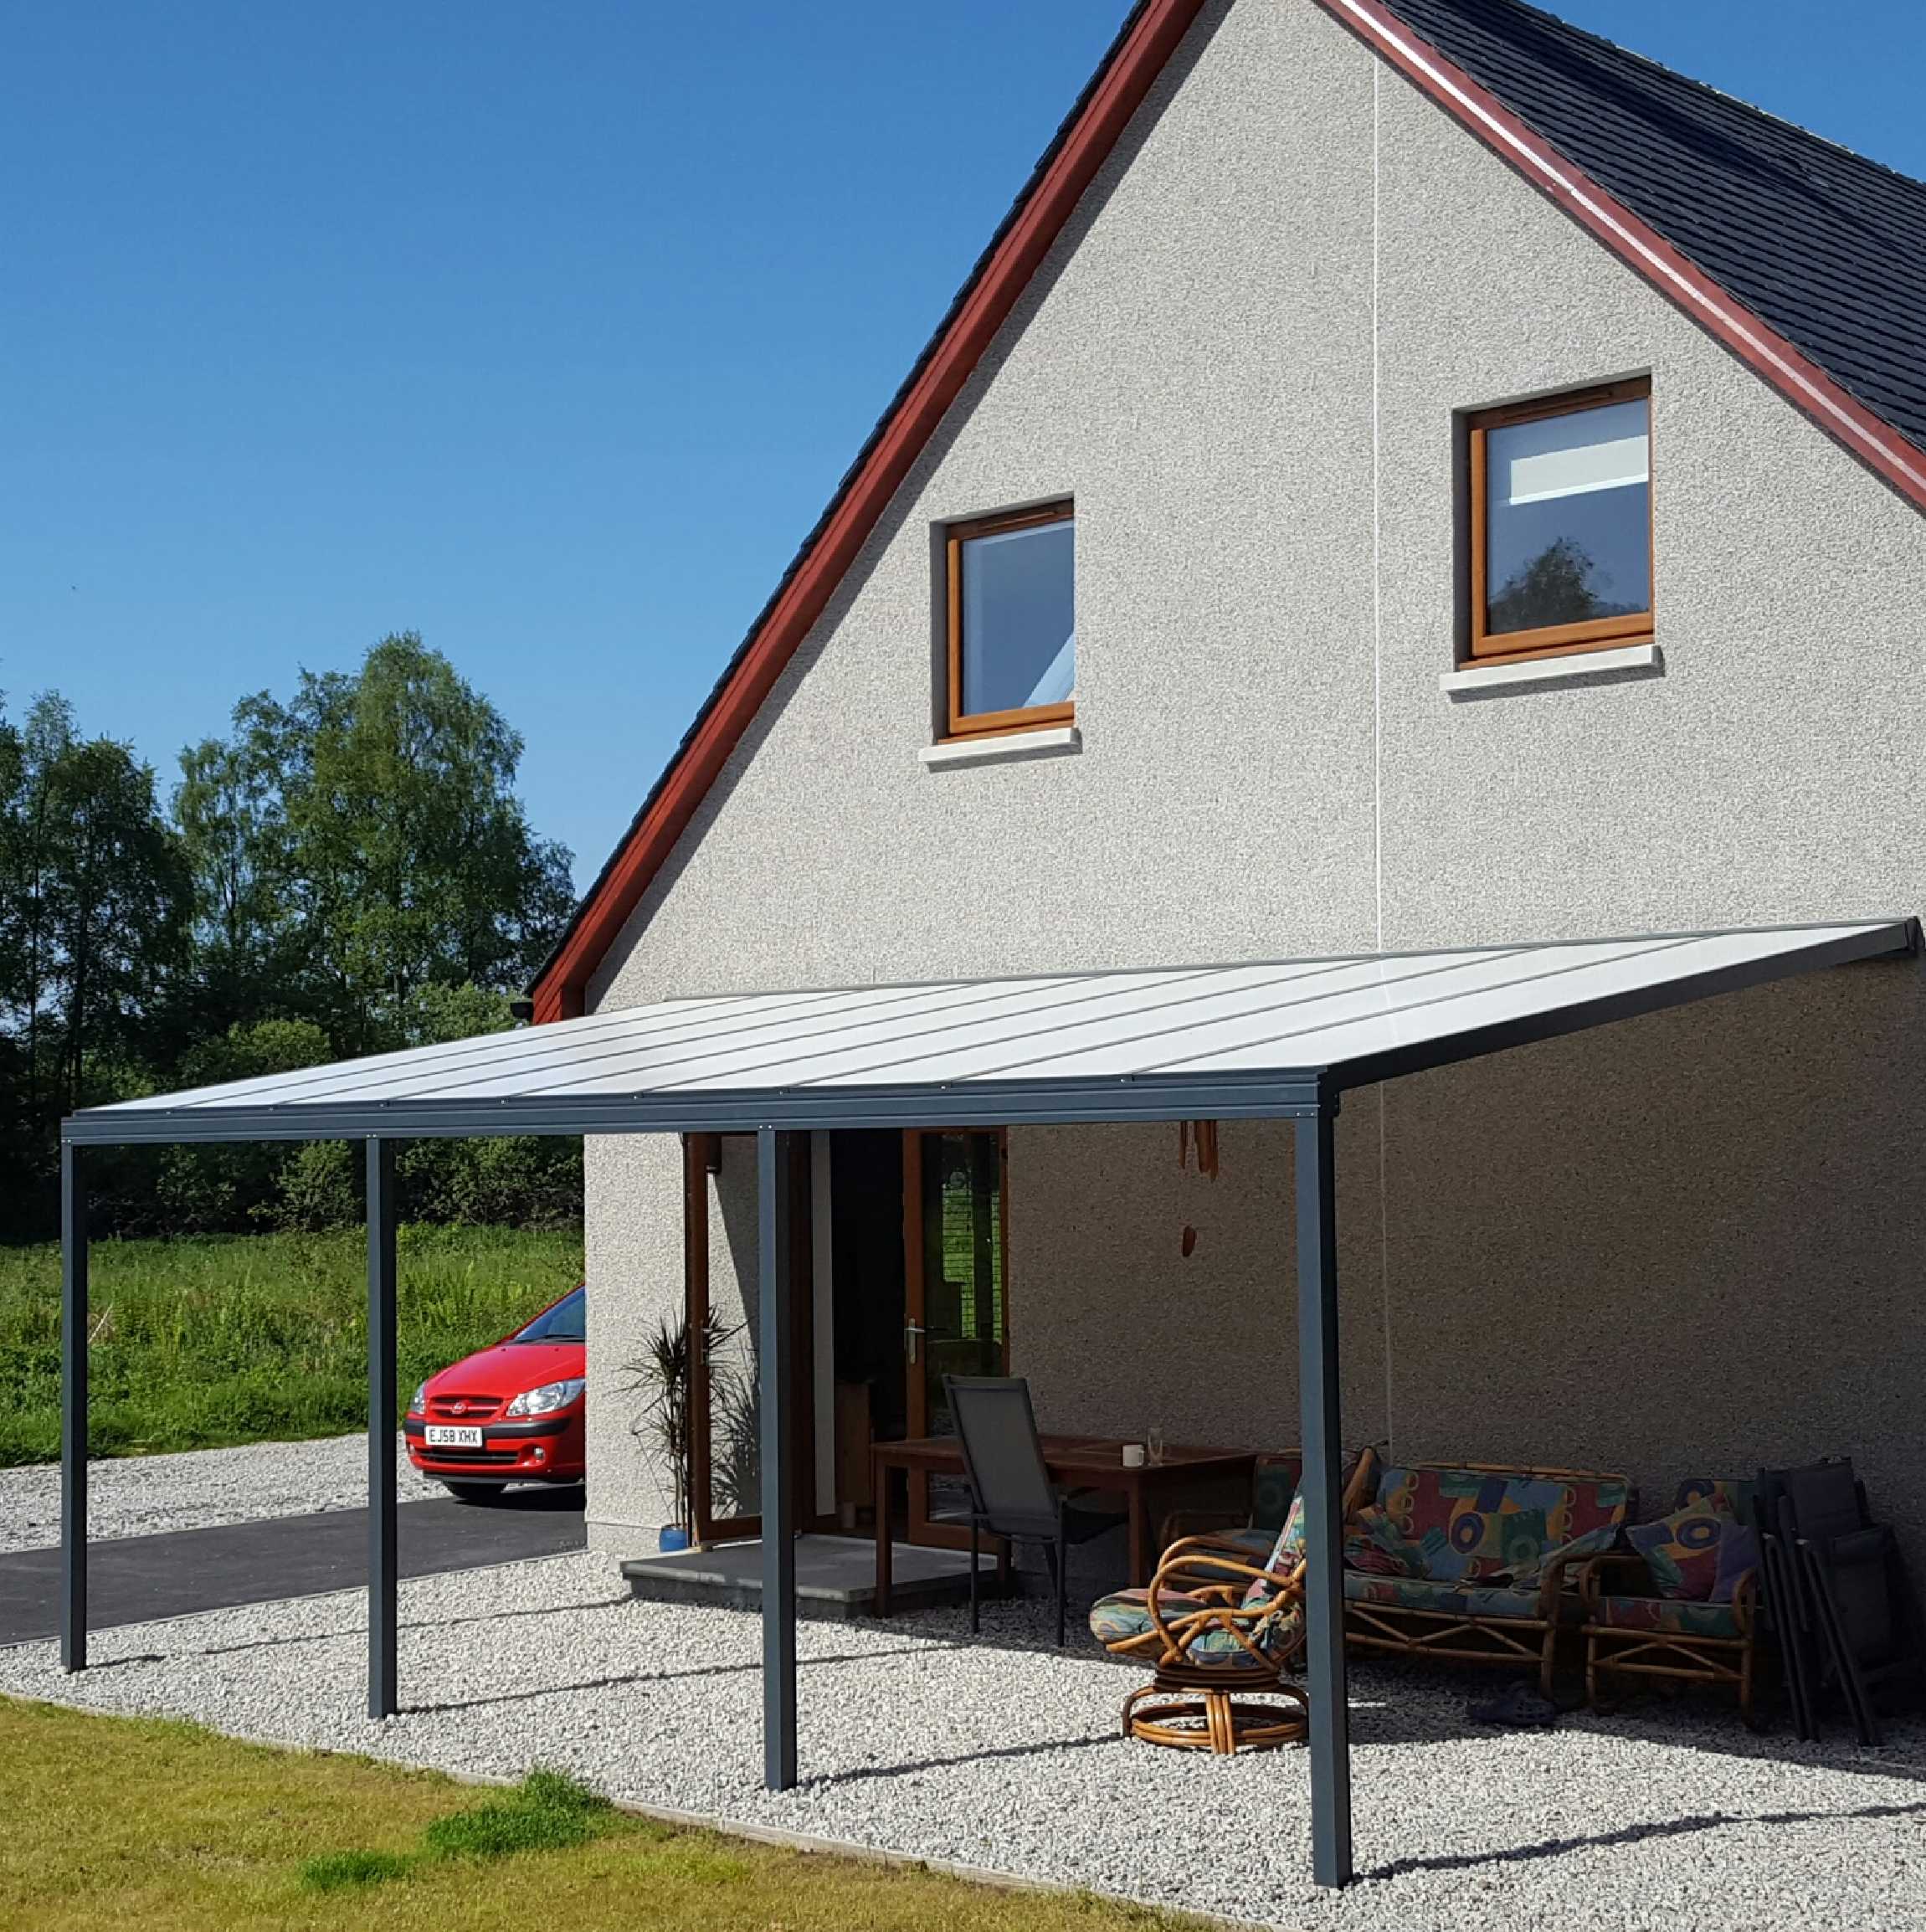 Great selection of Omega Smart Lean-To Canopy, Anthracite Grey, 16mm Polycarbonate Glazing - 10.6m (W) x 4.0m (P), (5) Supporting Posts